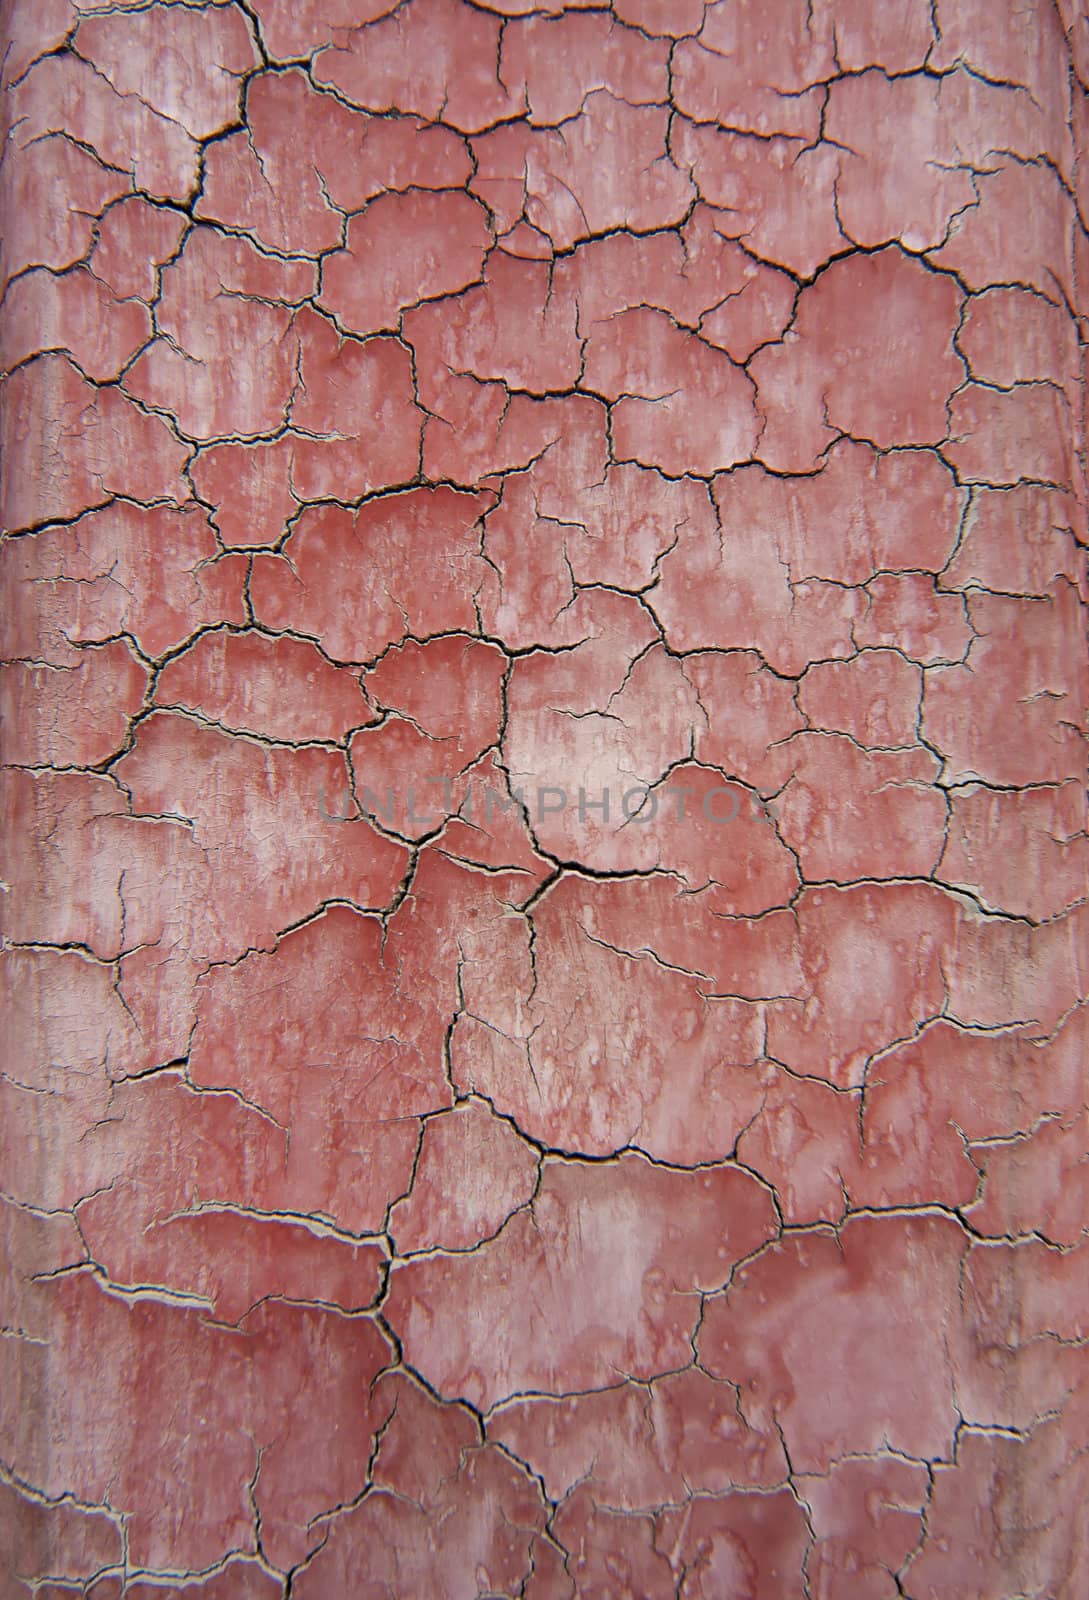 Paint cracking up on red wall - detail shot.